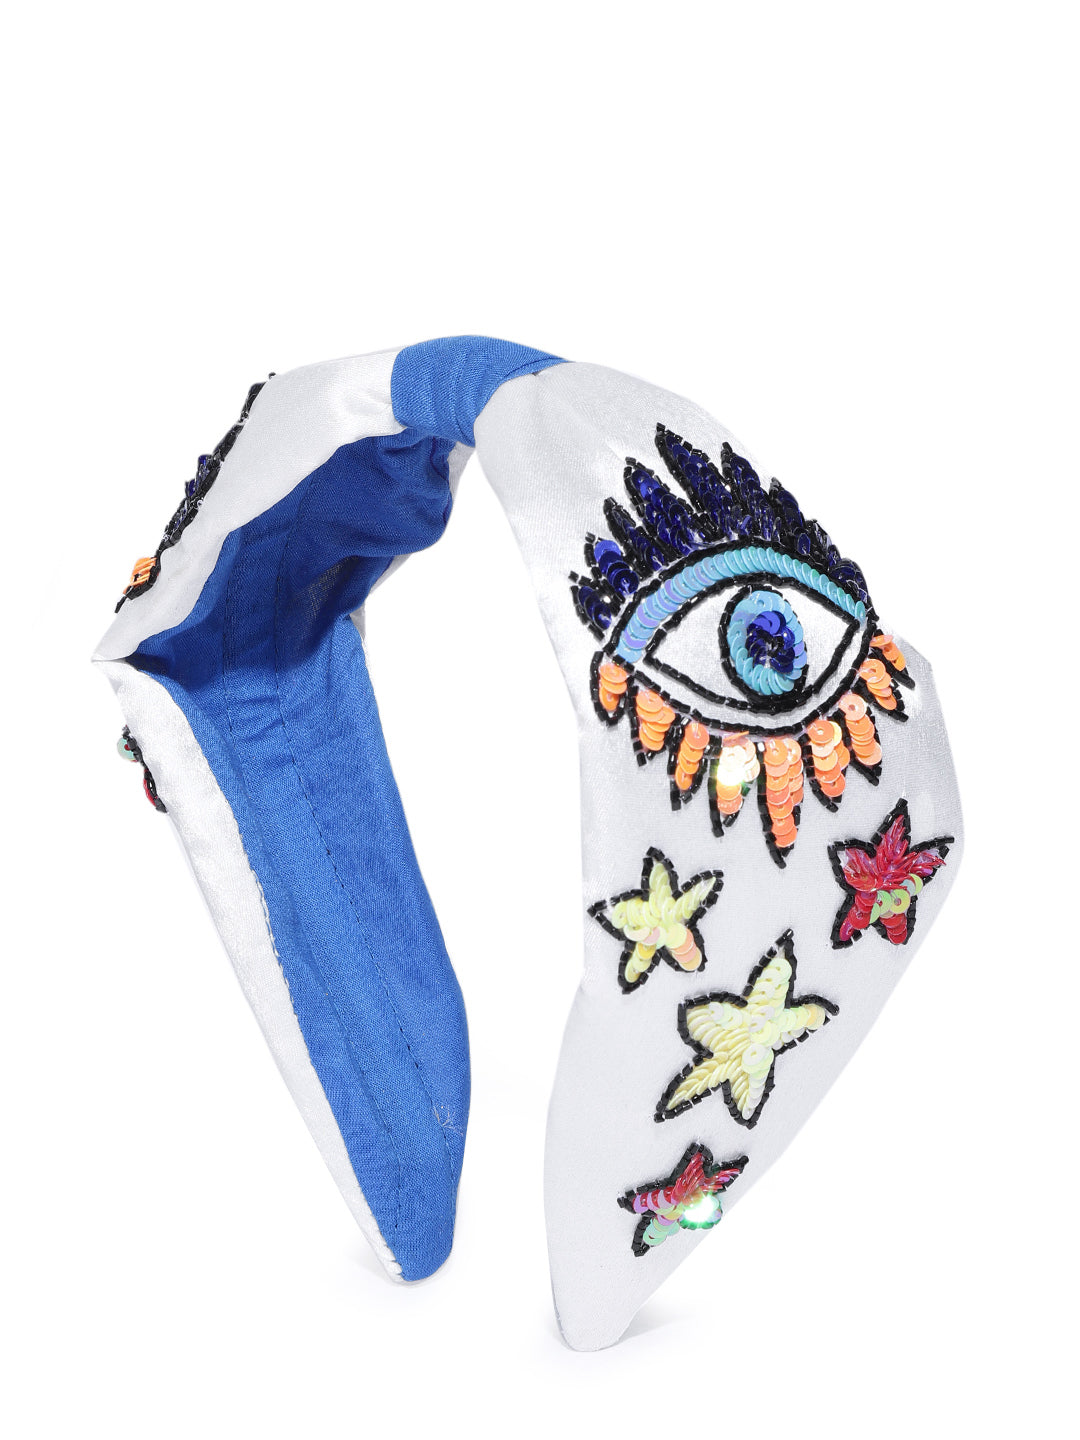 Blueberry multi sequins and beads embellished evil eye detailing satin knot hairband